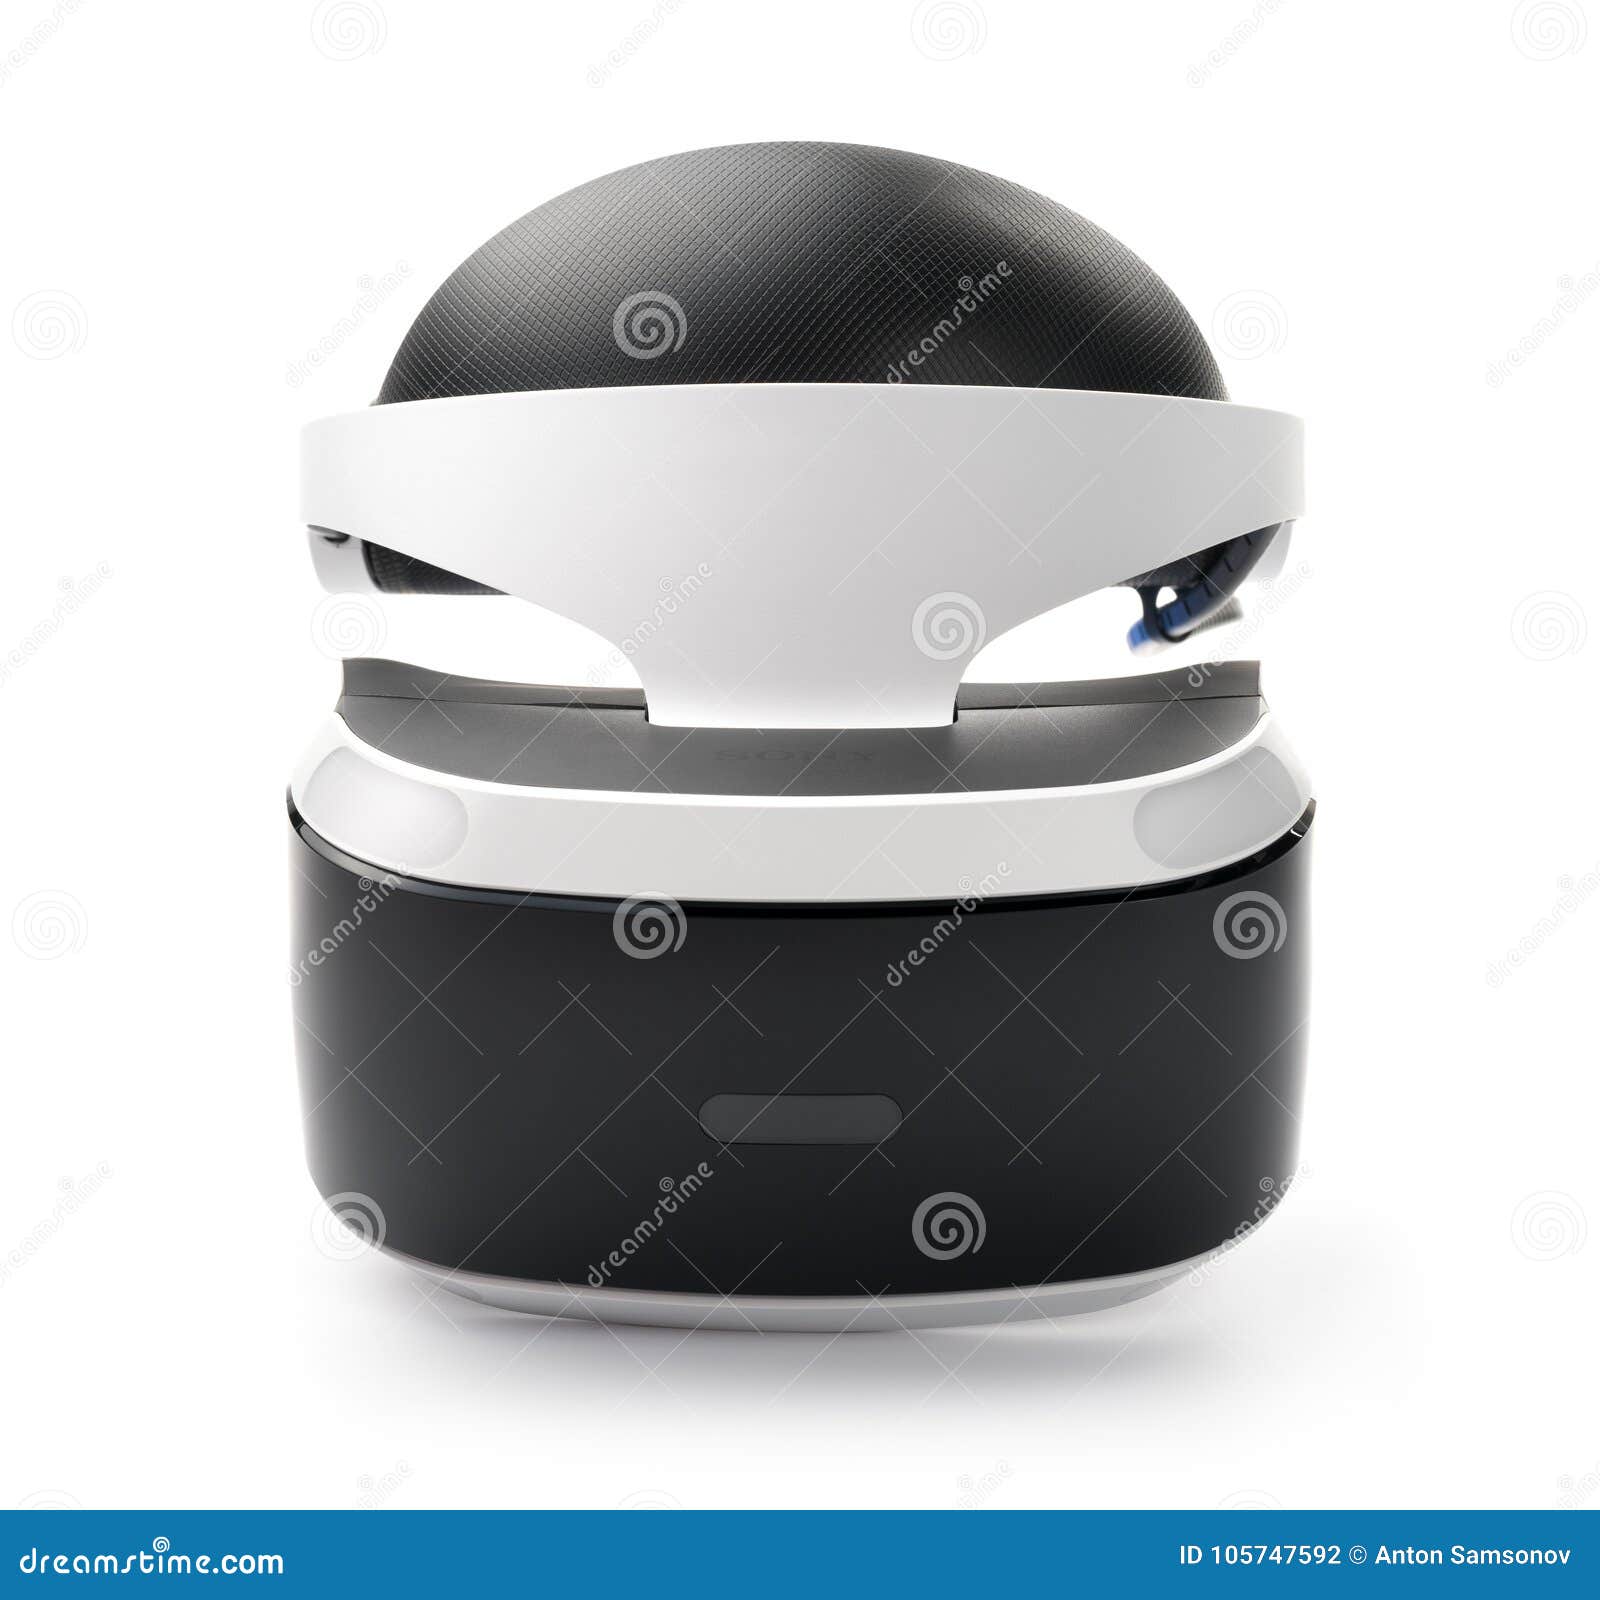 Sony Playstation VR Virtual Reality Headset For Playstation 4